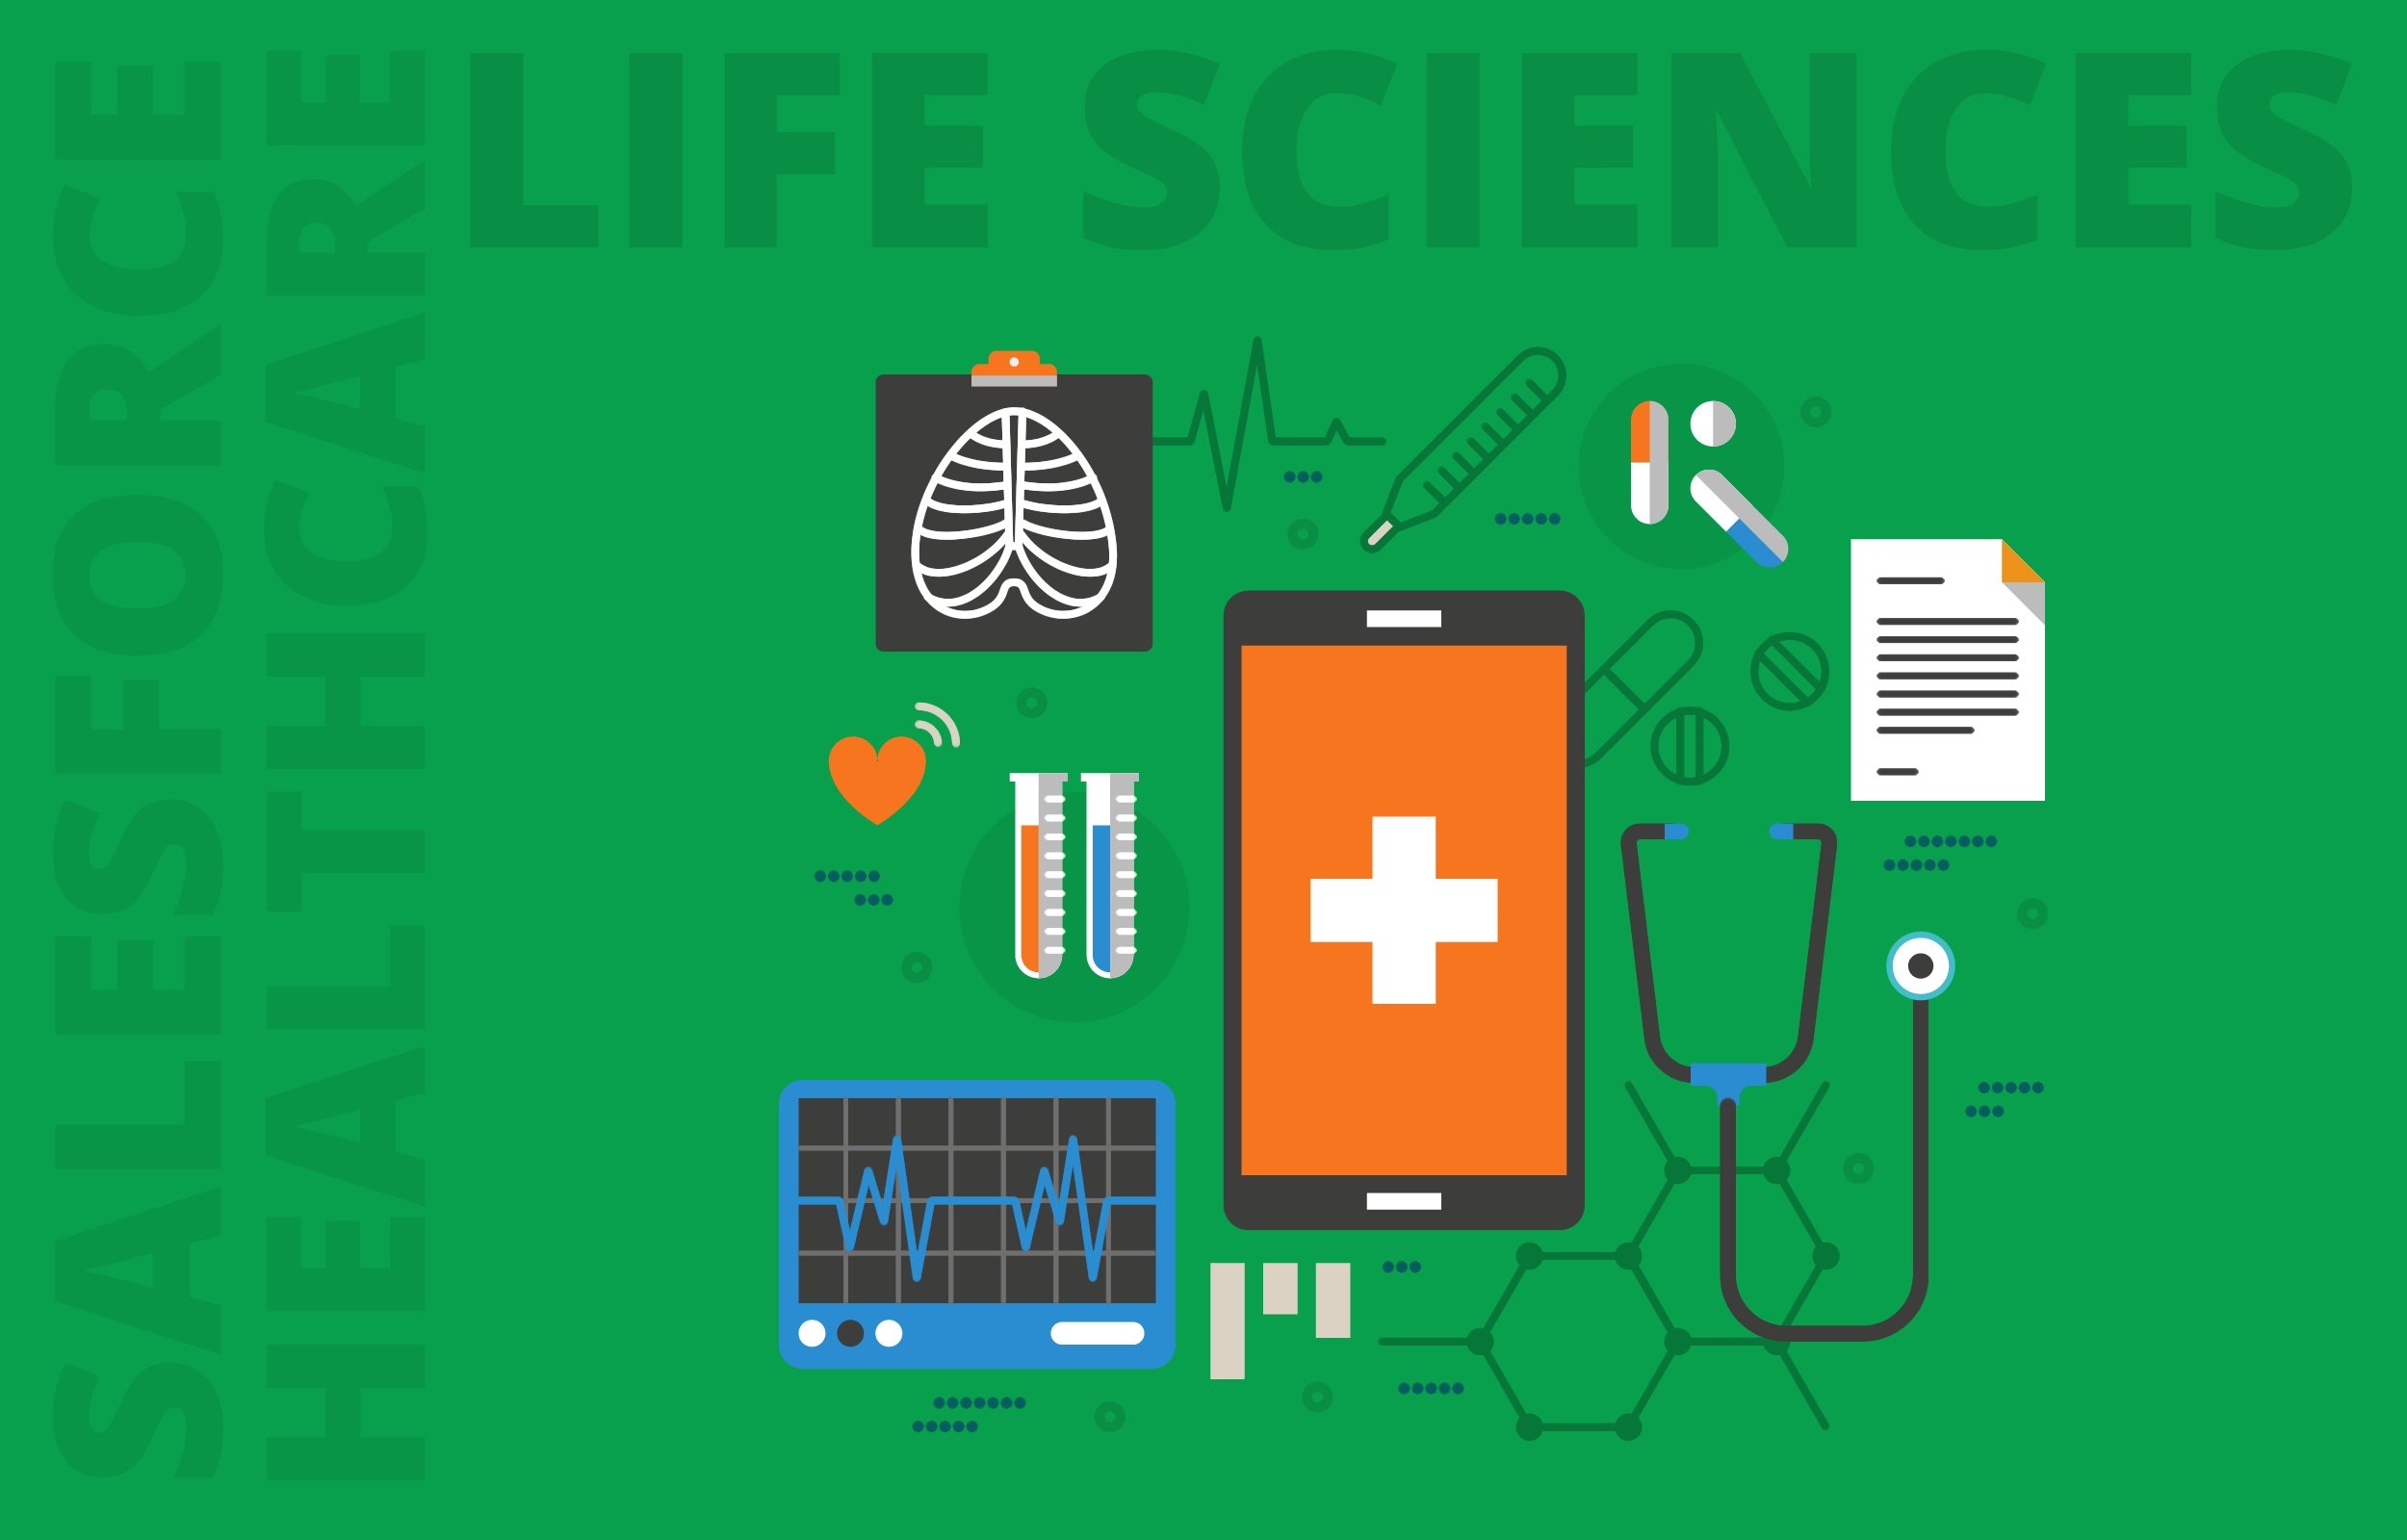 Grounds for Salesforce in Healthcare and Life Sciences